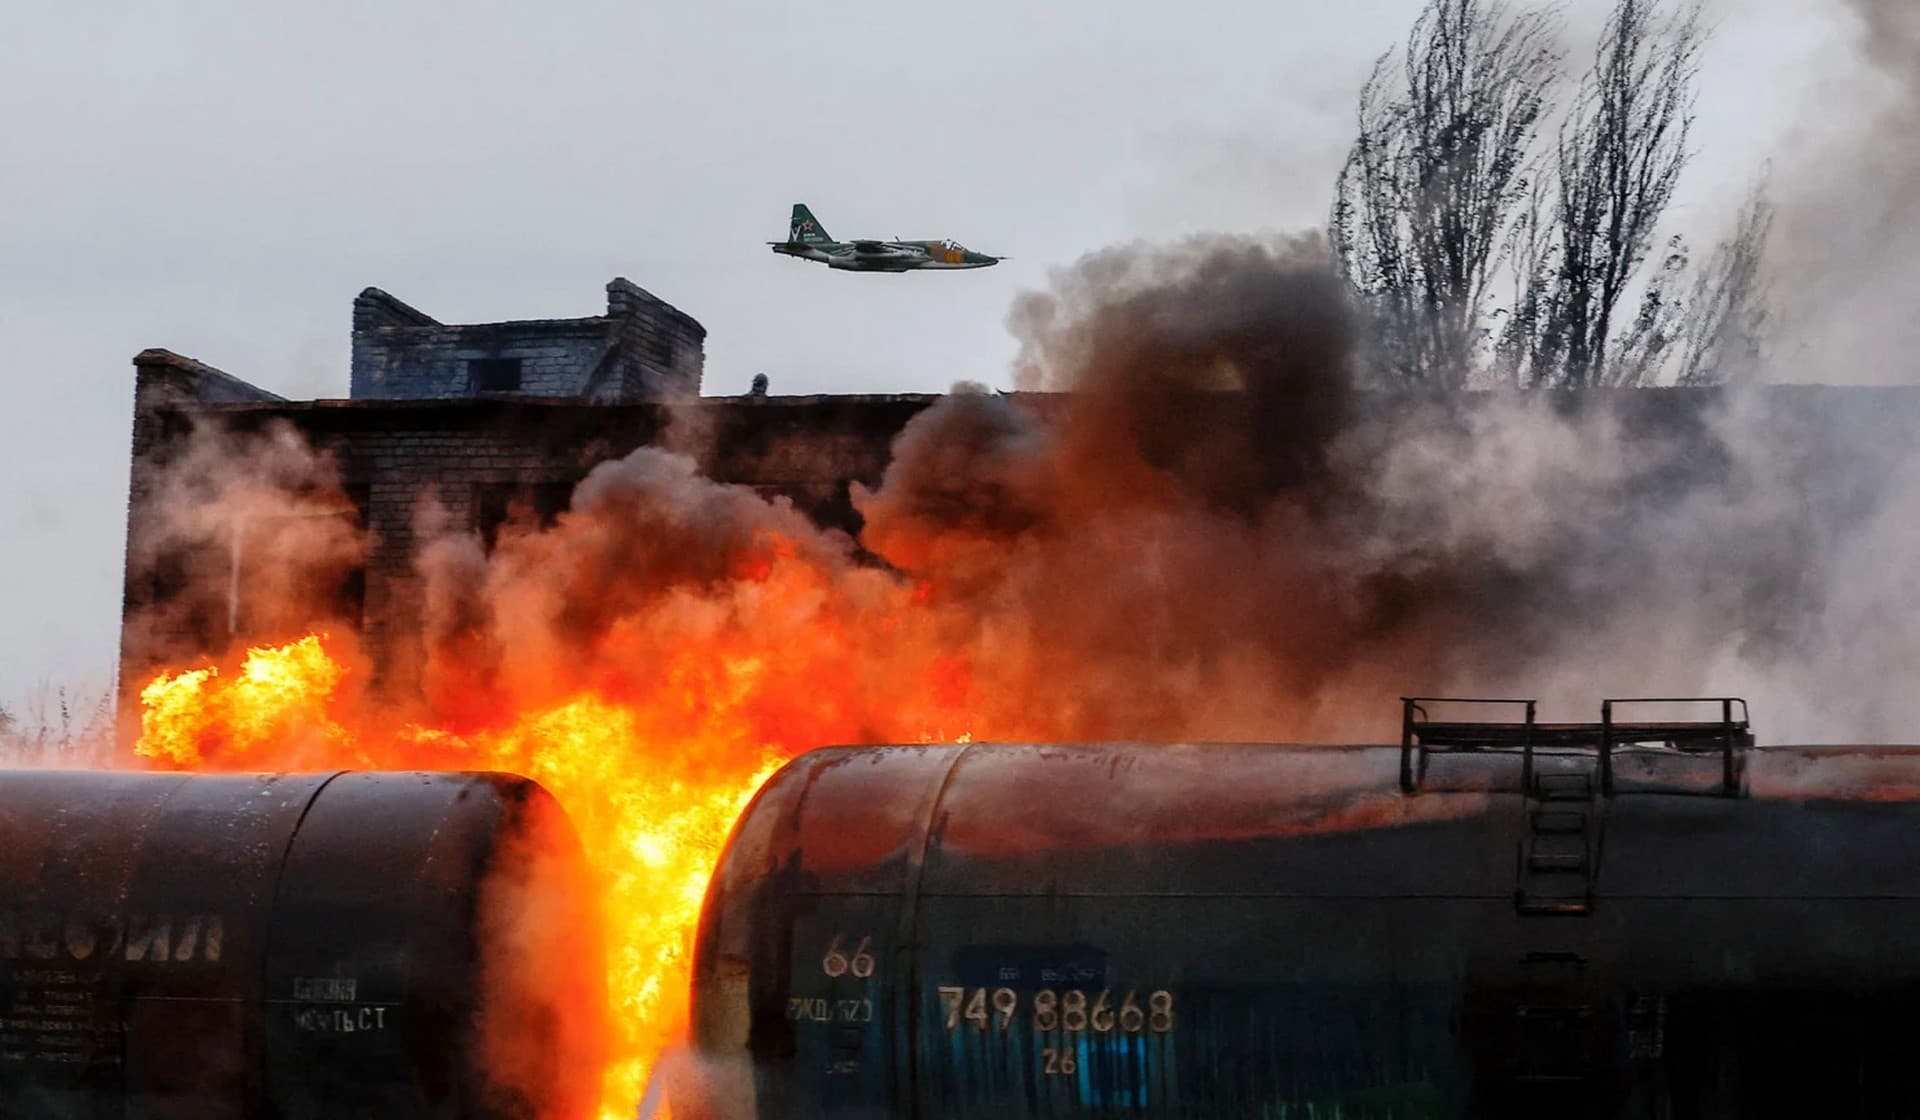 A Russian fighter jet flies above a railway junction on fire following recent shelling in Shakhtarsk